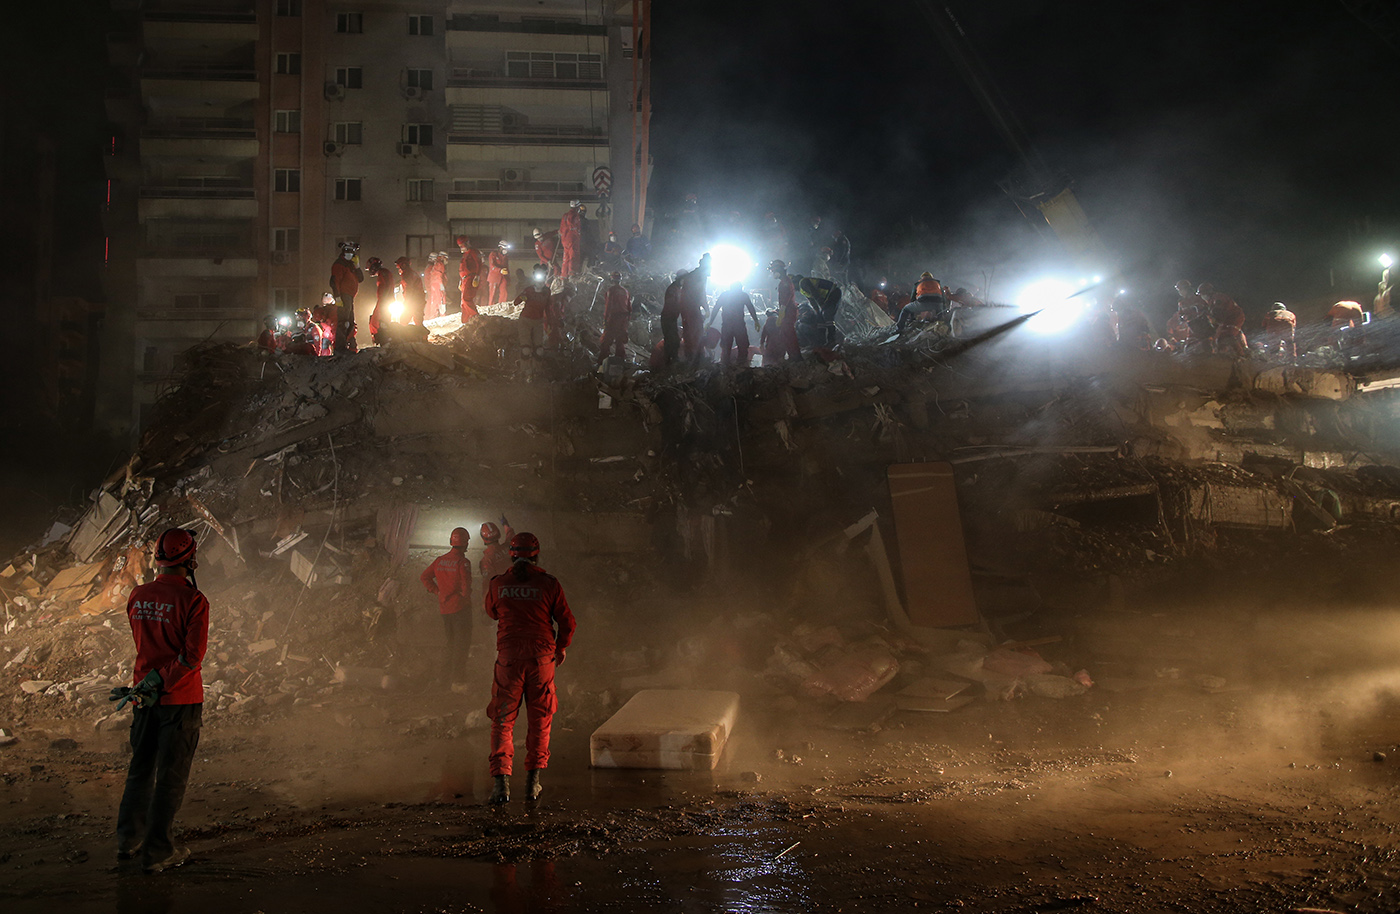 Rescue workers search for survivors at the site of a collapsed building after a 7.0 magnitude earthquake in the Aegean Sea, at Bayrakli district in the Aegean Sea, at Bayrakli district in Izmir, Turkey, 01 November 2020. According to Turkish media reports, at least 62  people died while more than eight  hundreds were injured and dozens of buildings were destroyed in the earthquake.